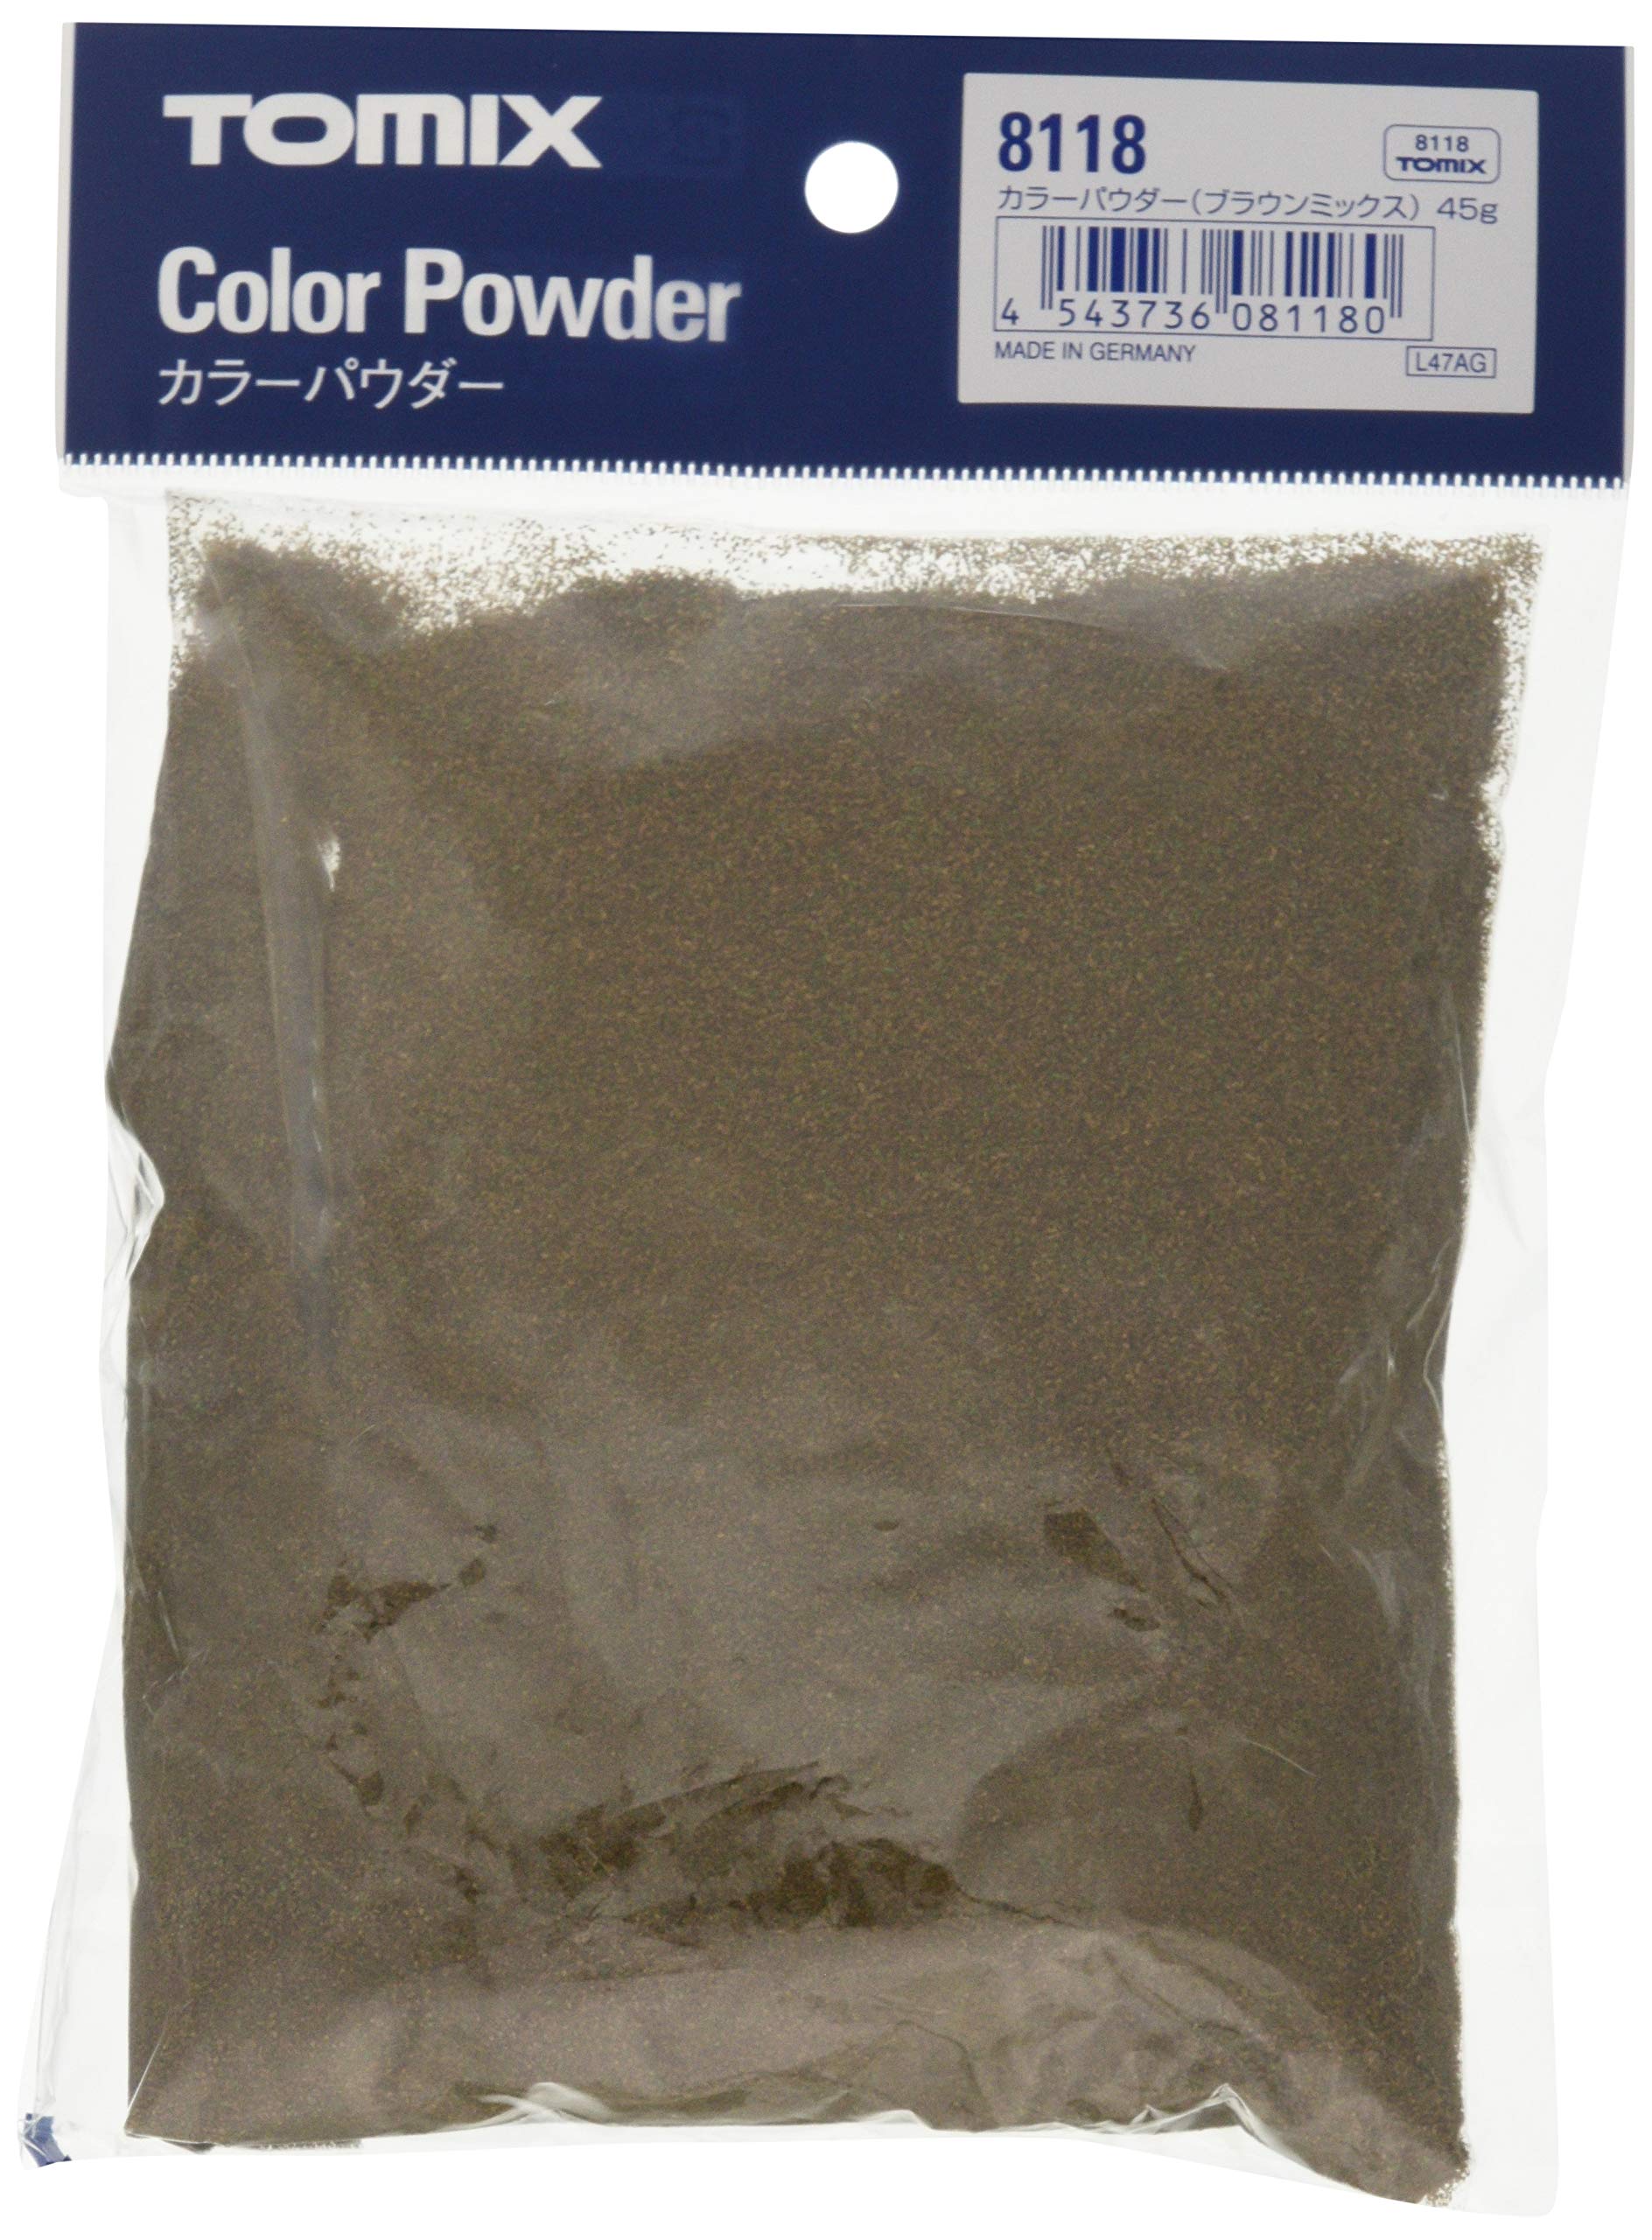 Tomytec Tomix N Gauge Brown Mix Color Powder 8118 for Railway Model Supplies